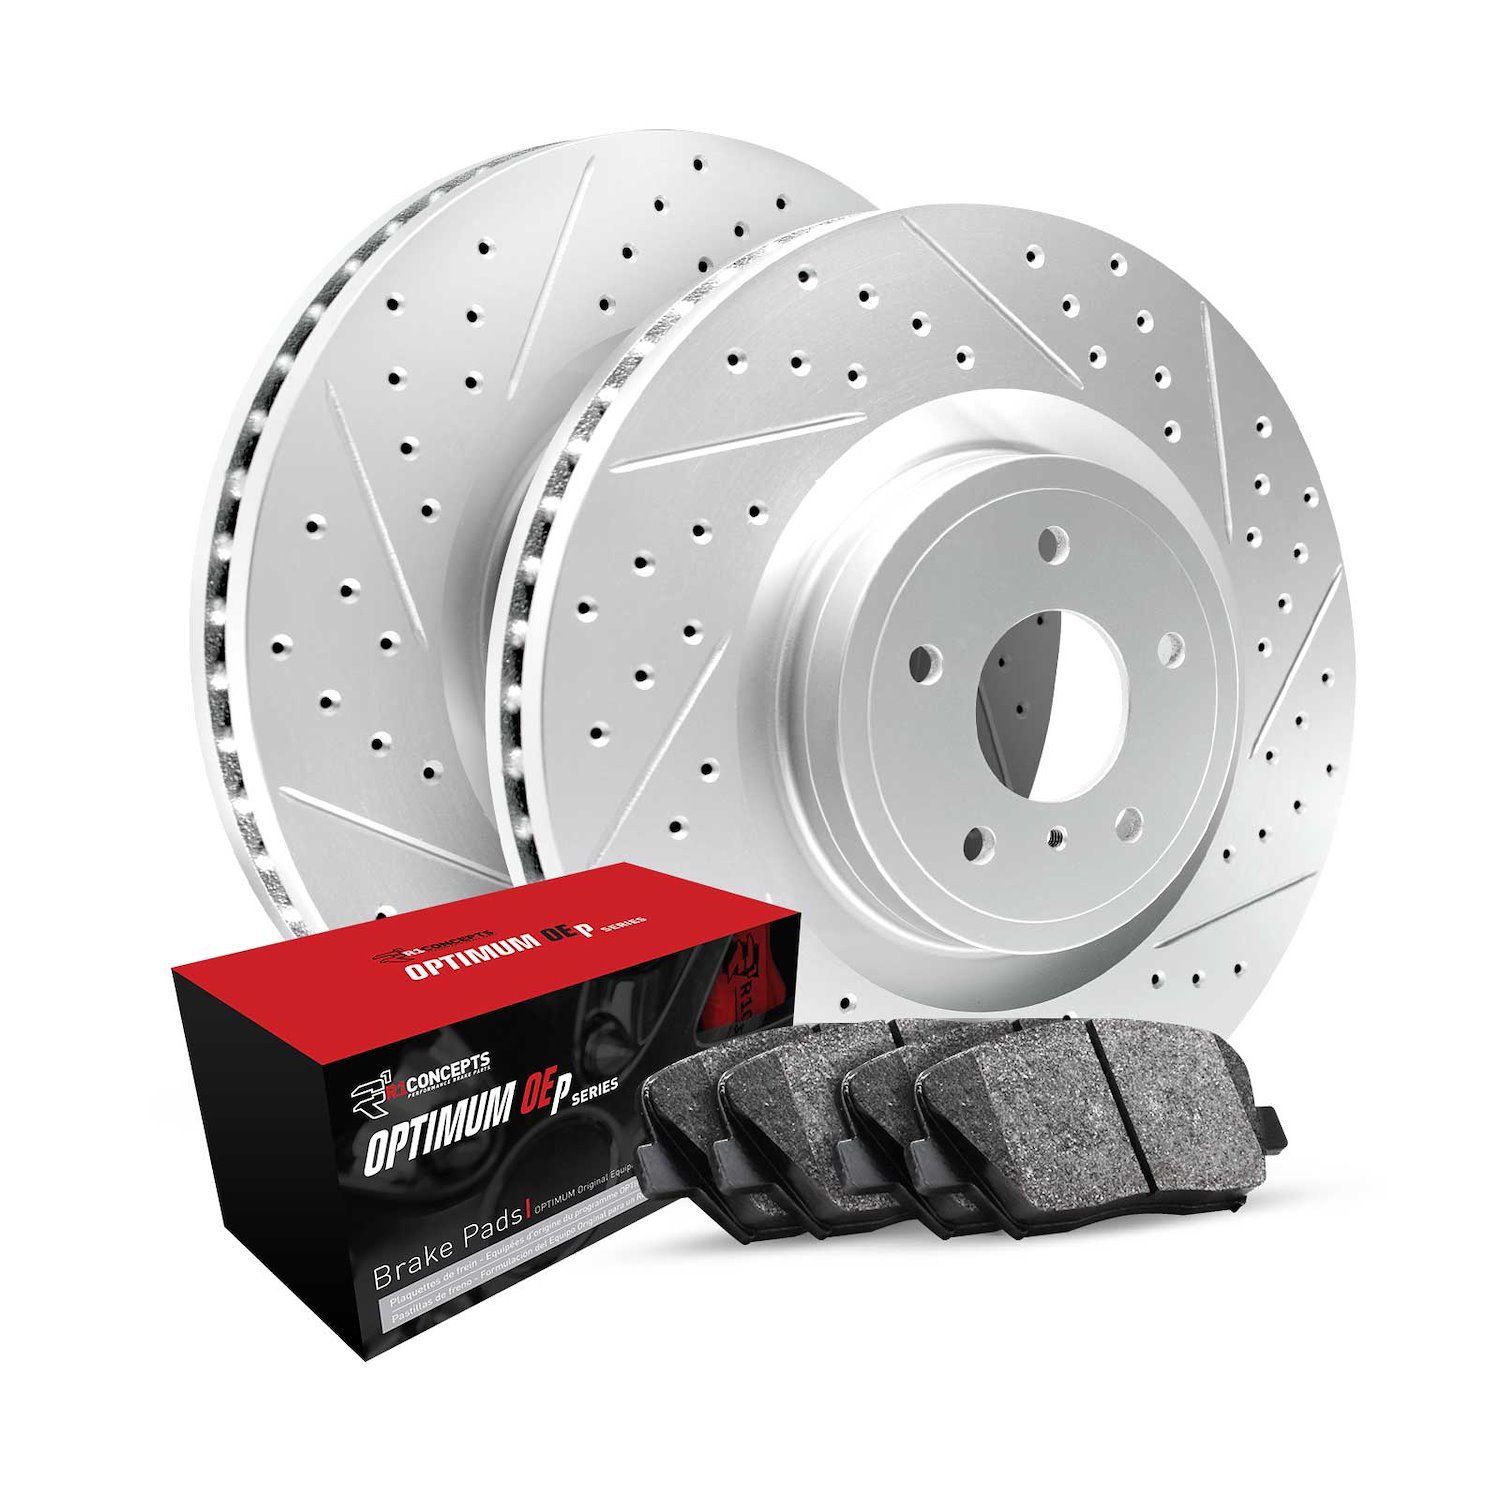 GEO-Carbon Drilled/Slotted Rotors w/Optimum OE Pads, Fits Select Multiple Makes/Models, Position: Front